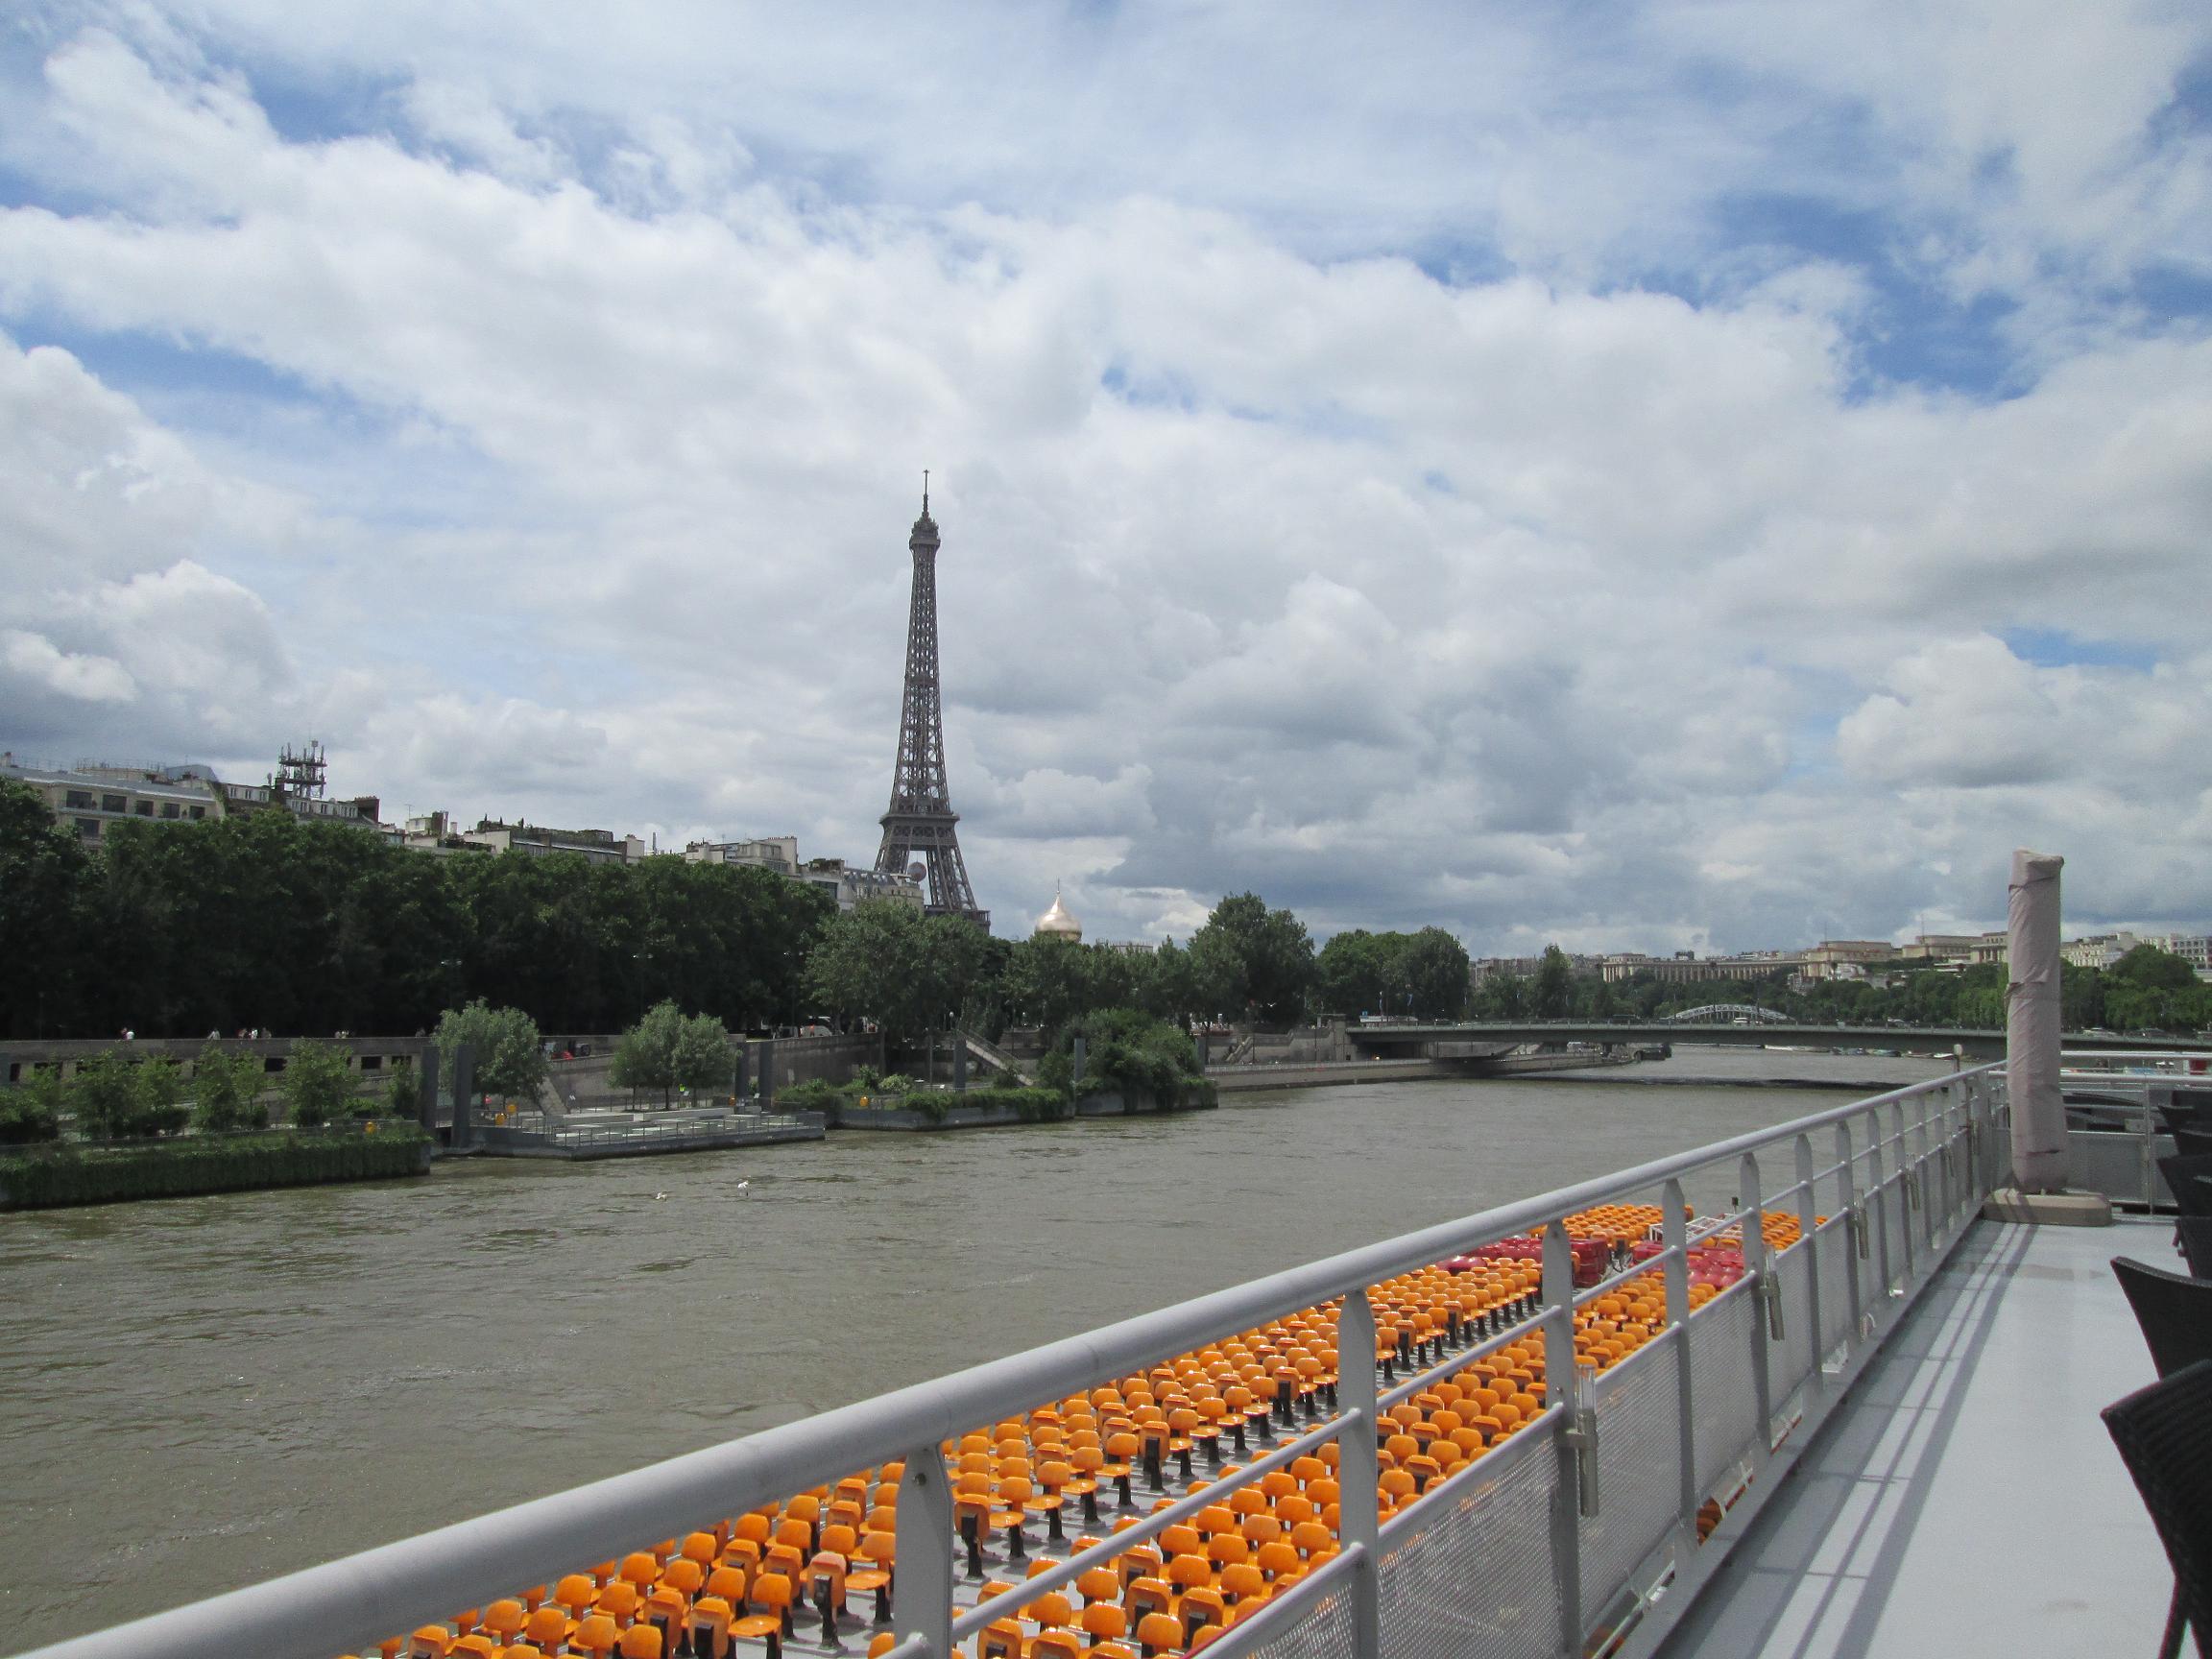 The Seine and Eiffel Tower seen on June 14th from the Bateaux Mouches dock. A low sky. The Seine has still not reached its normal level. Some cruising companies are resuming their routes - Photo MS